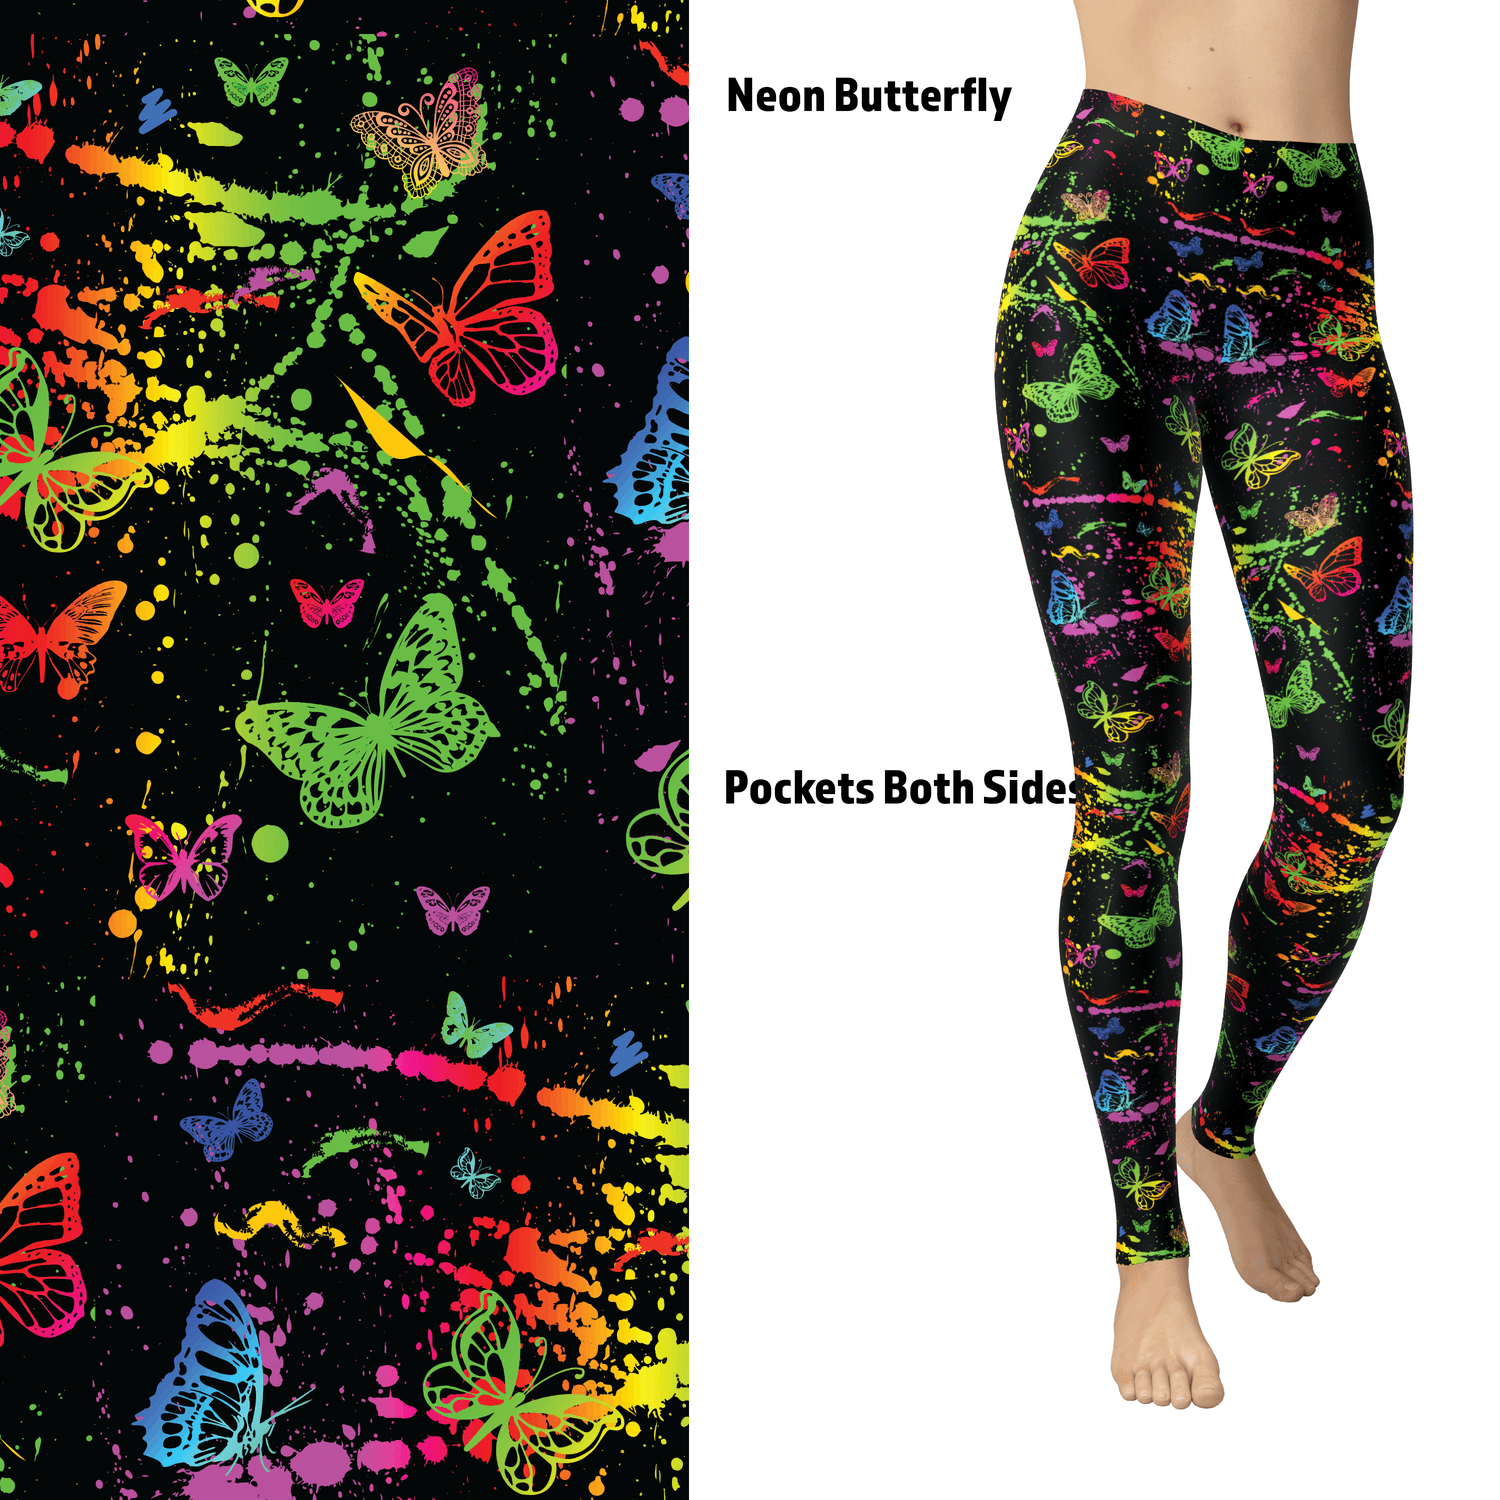 Neon Butterfly Leggings with pockets – Mode Motif